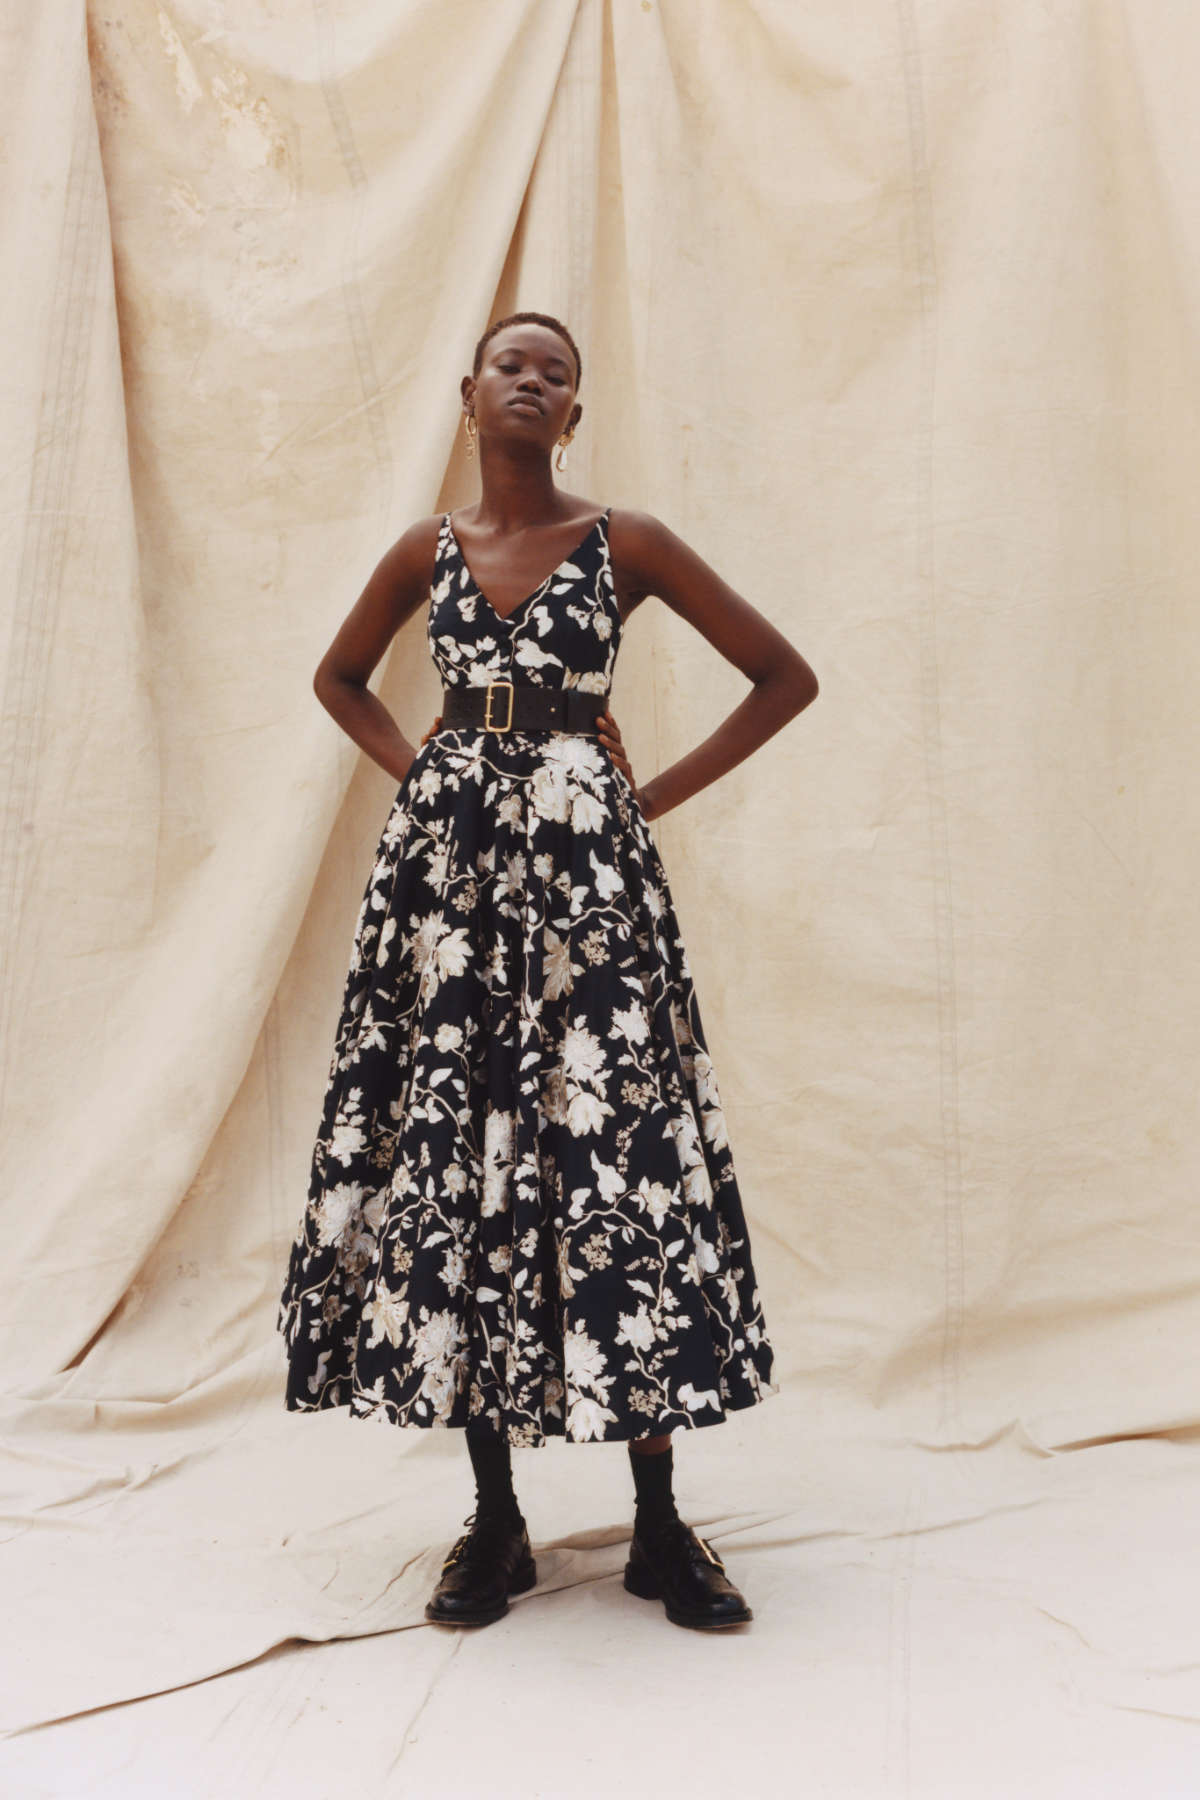 Erdem Presents Its New Womenswear Pre-Spring 2023 Collection